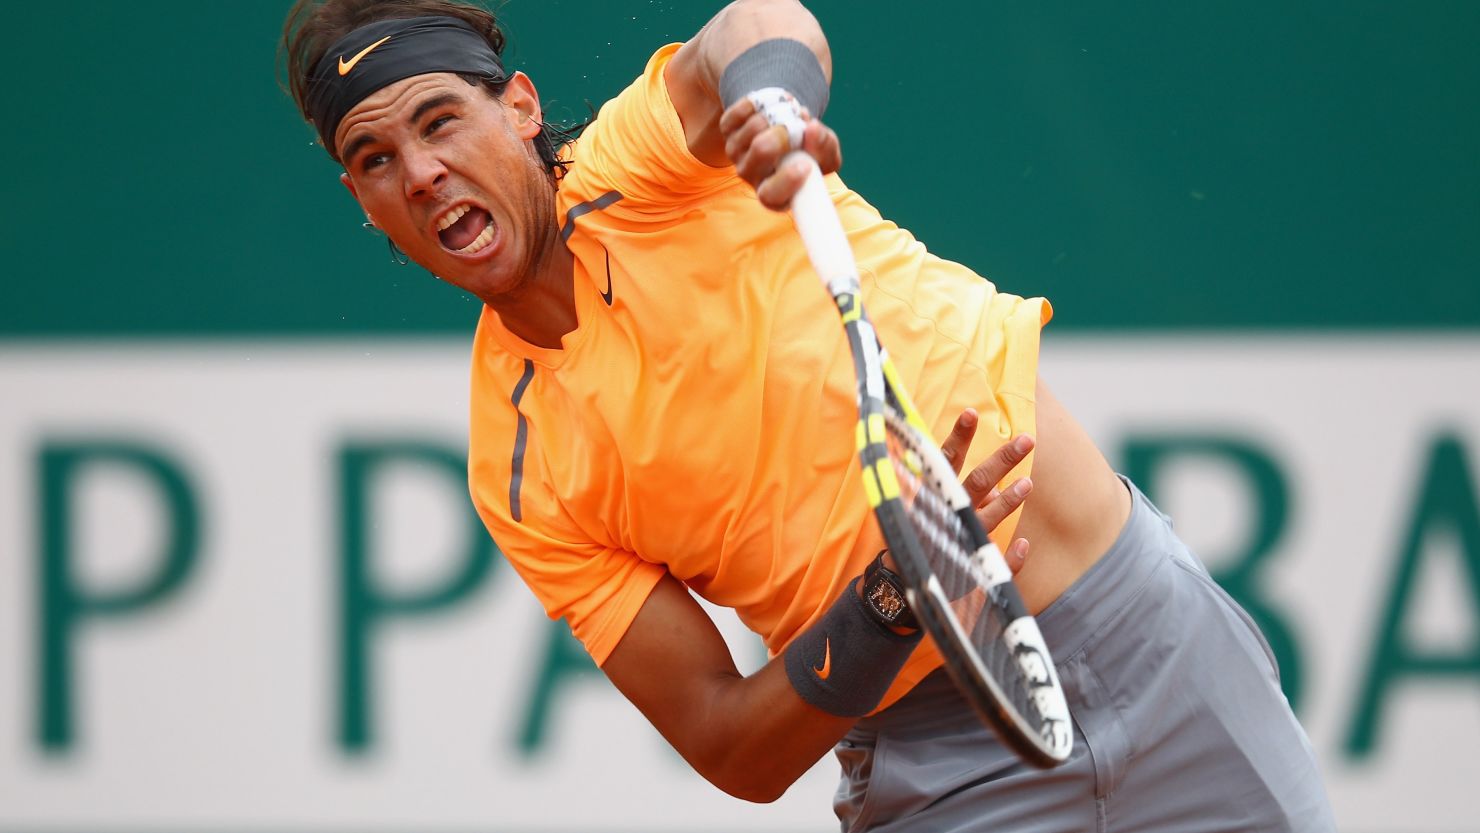 Nadal breezed in to the second round of the Monte Carlo Masters 